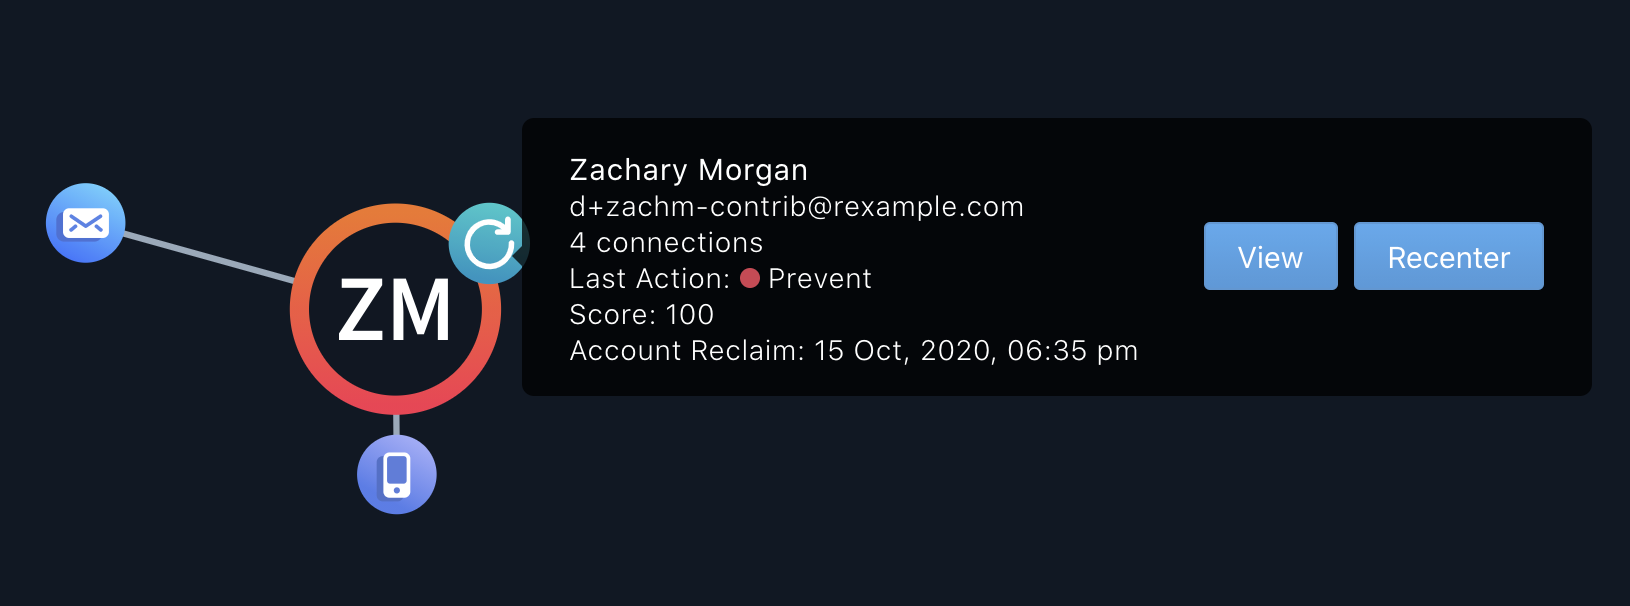 account takeover account reclaim